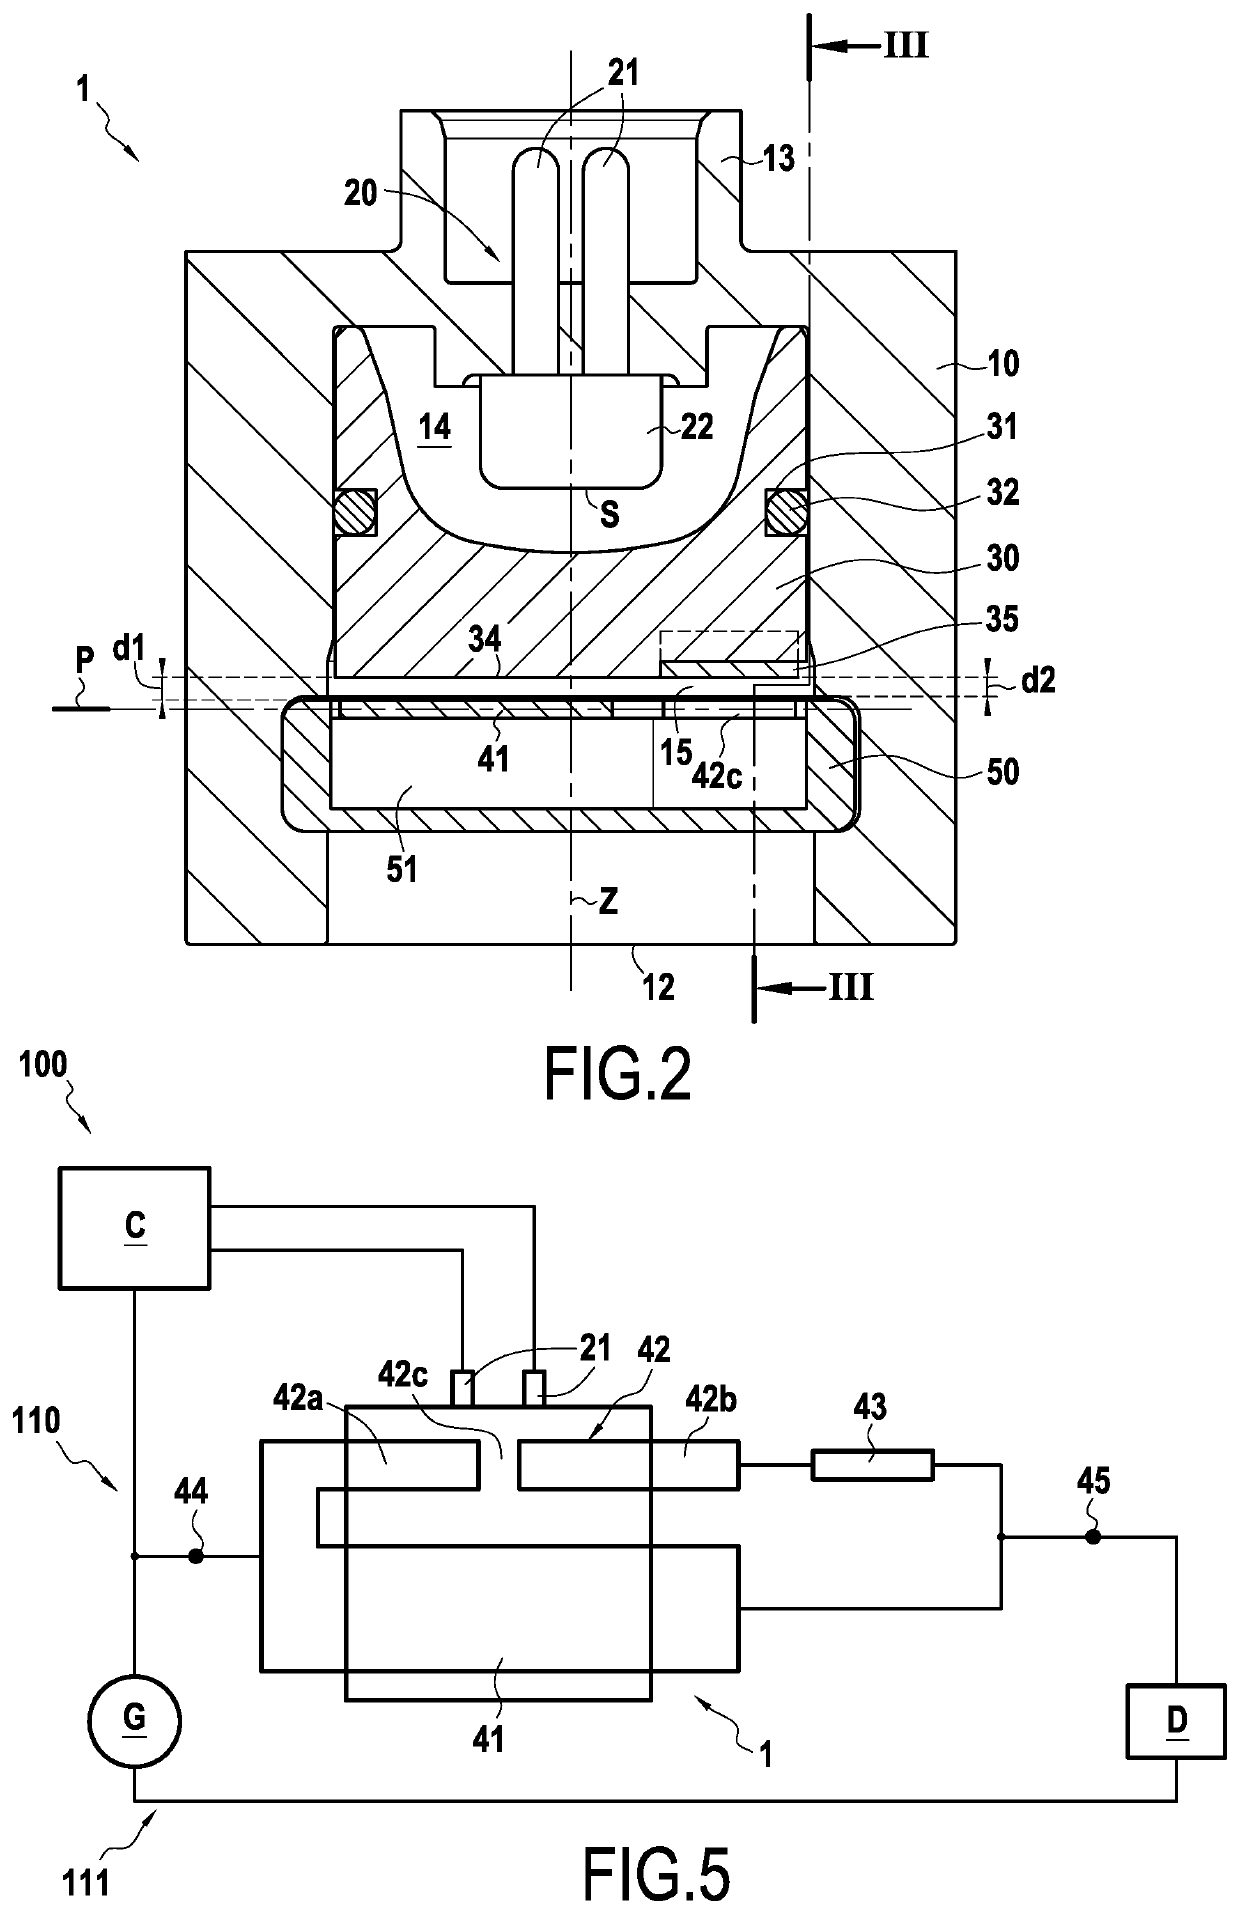 Pyrotechnic switching device